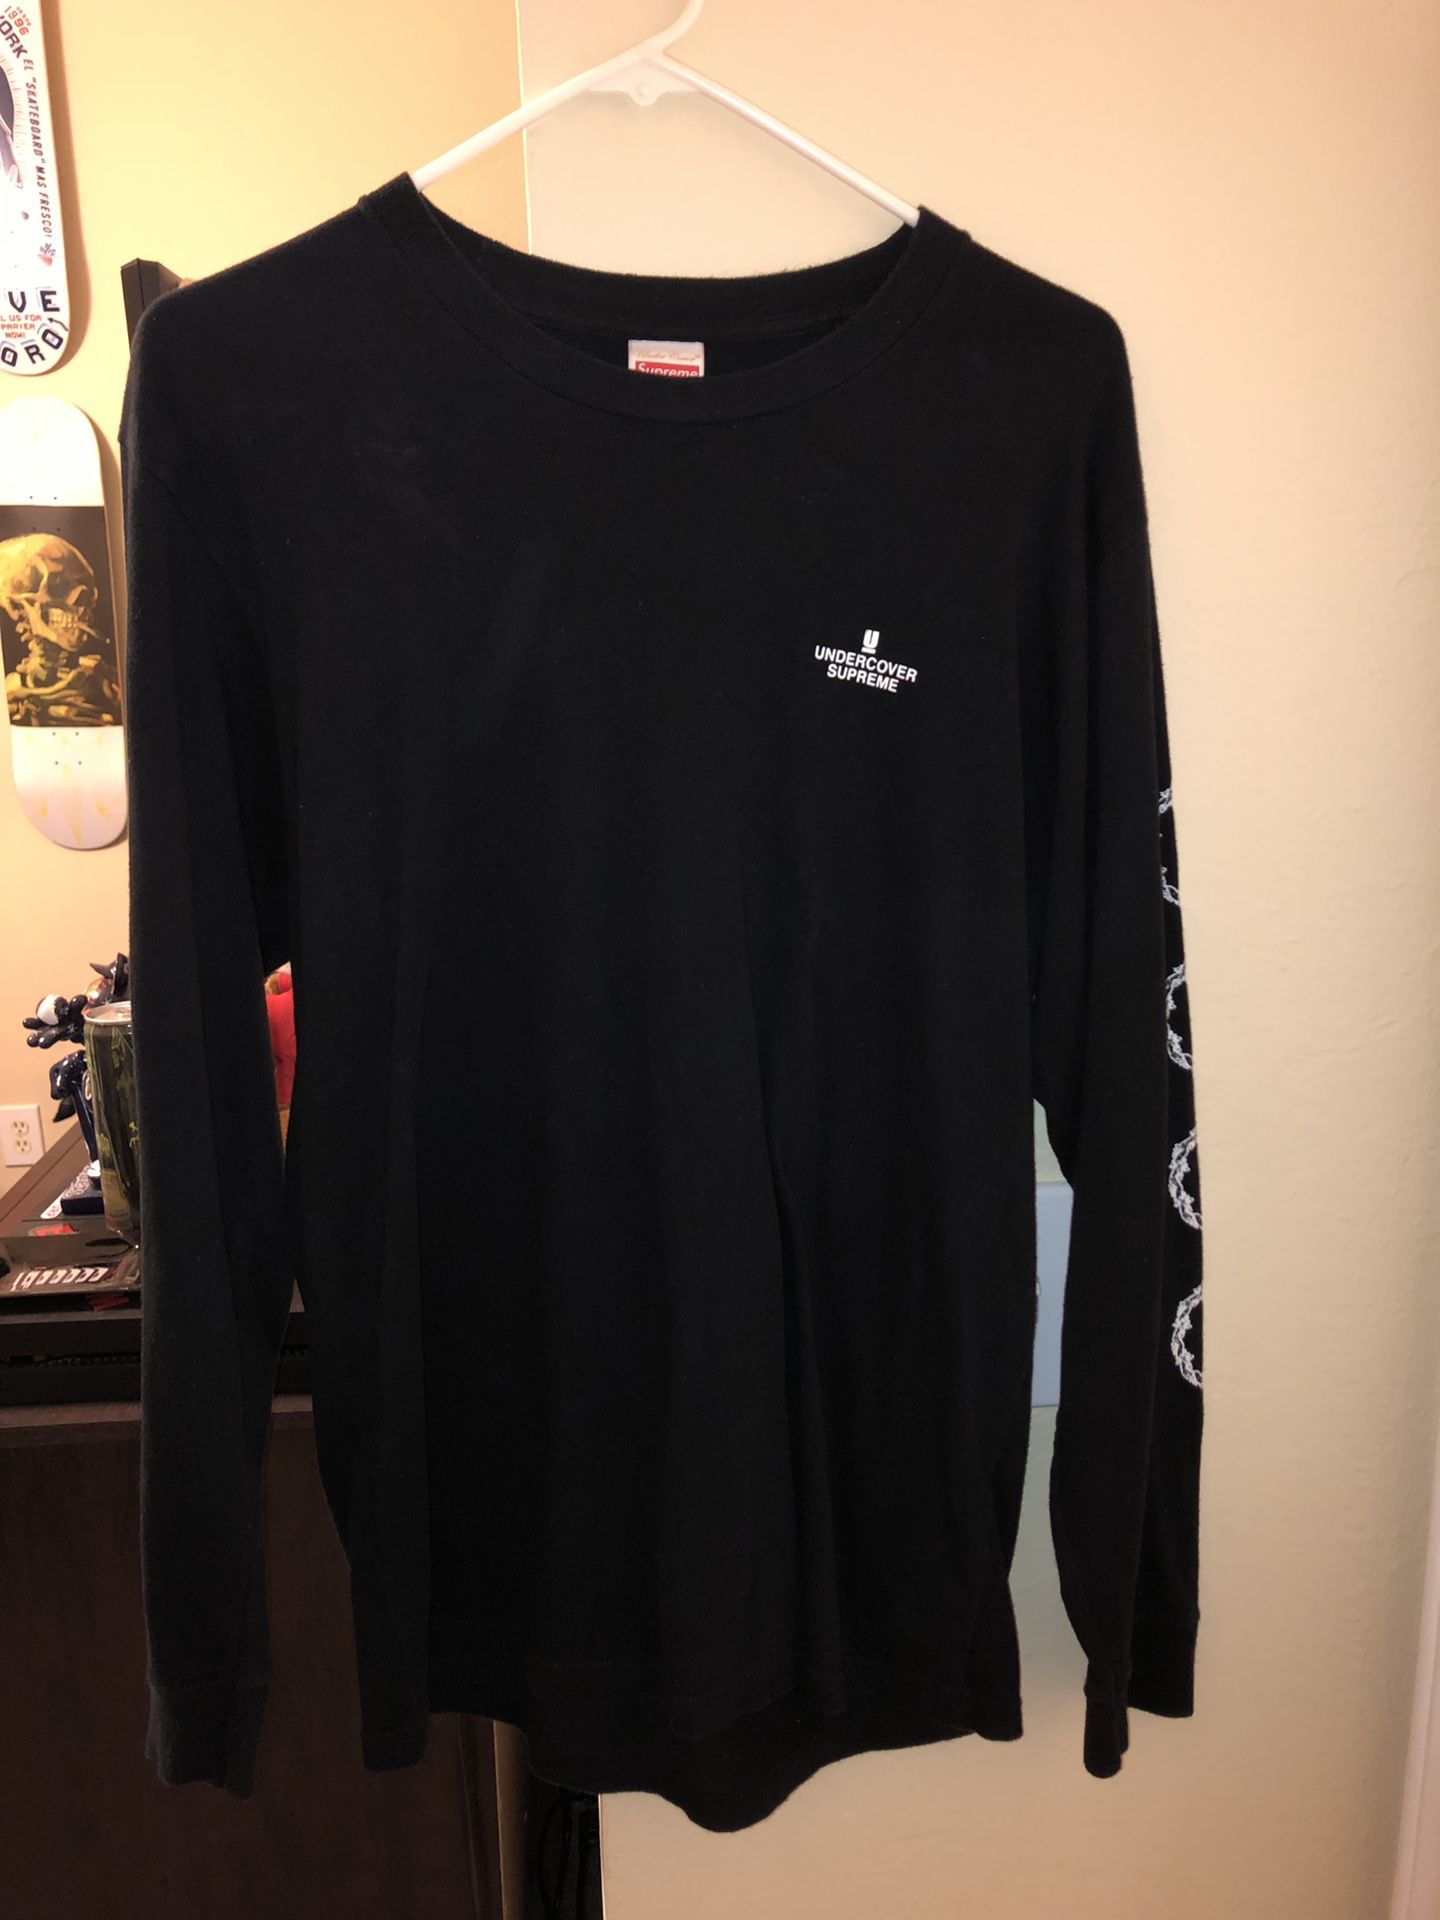 Supreme Undercover long sleeve size M